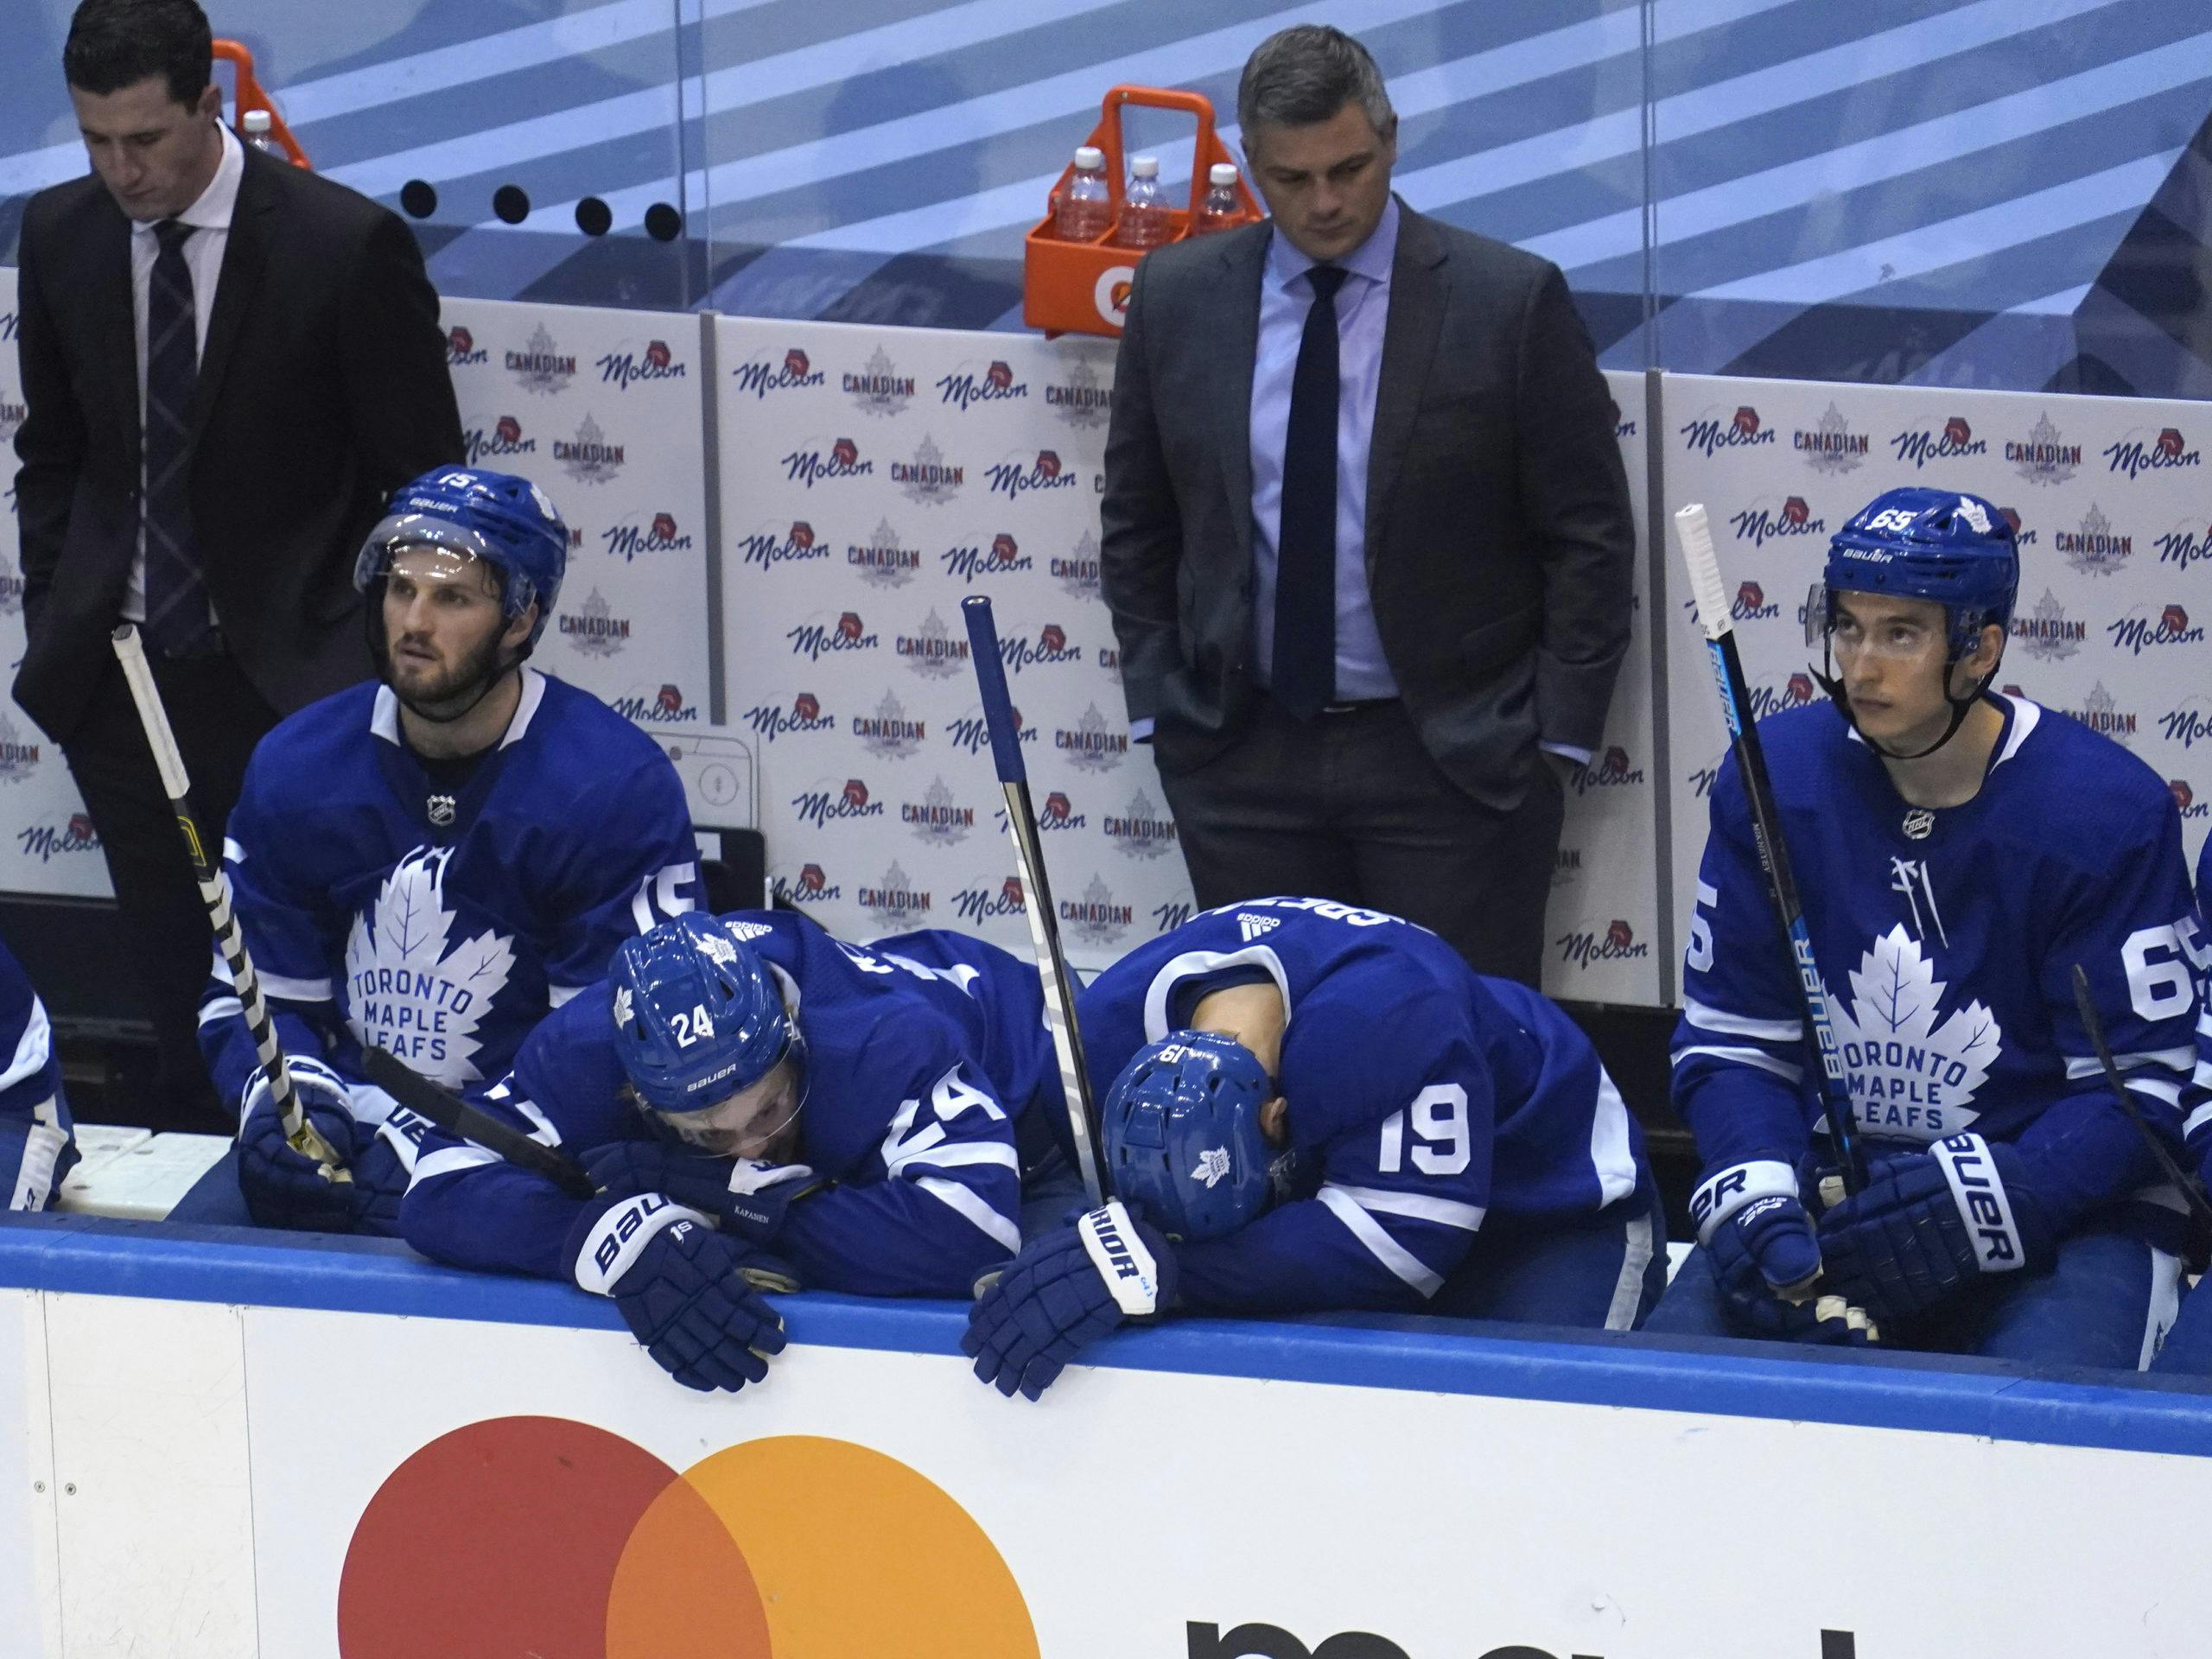 Toronto Maple Leafs fans are excited about John Tavares joining the team